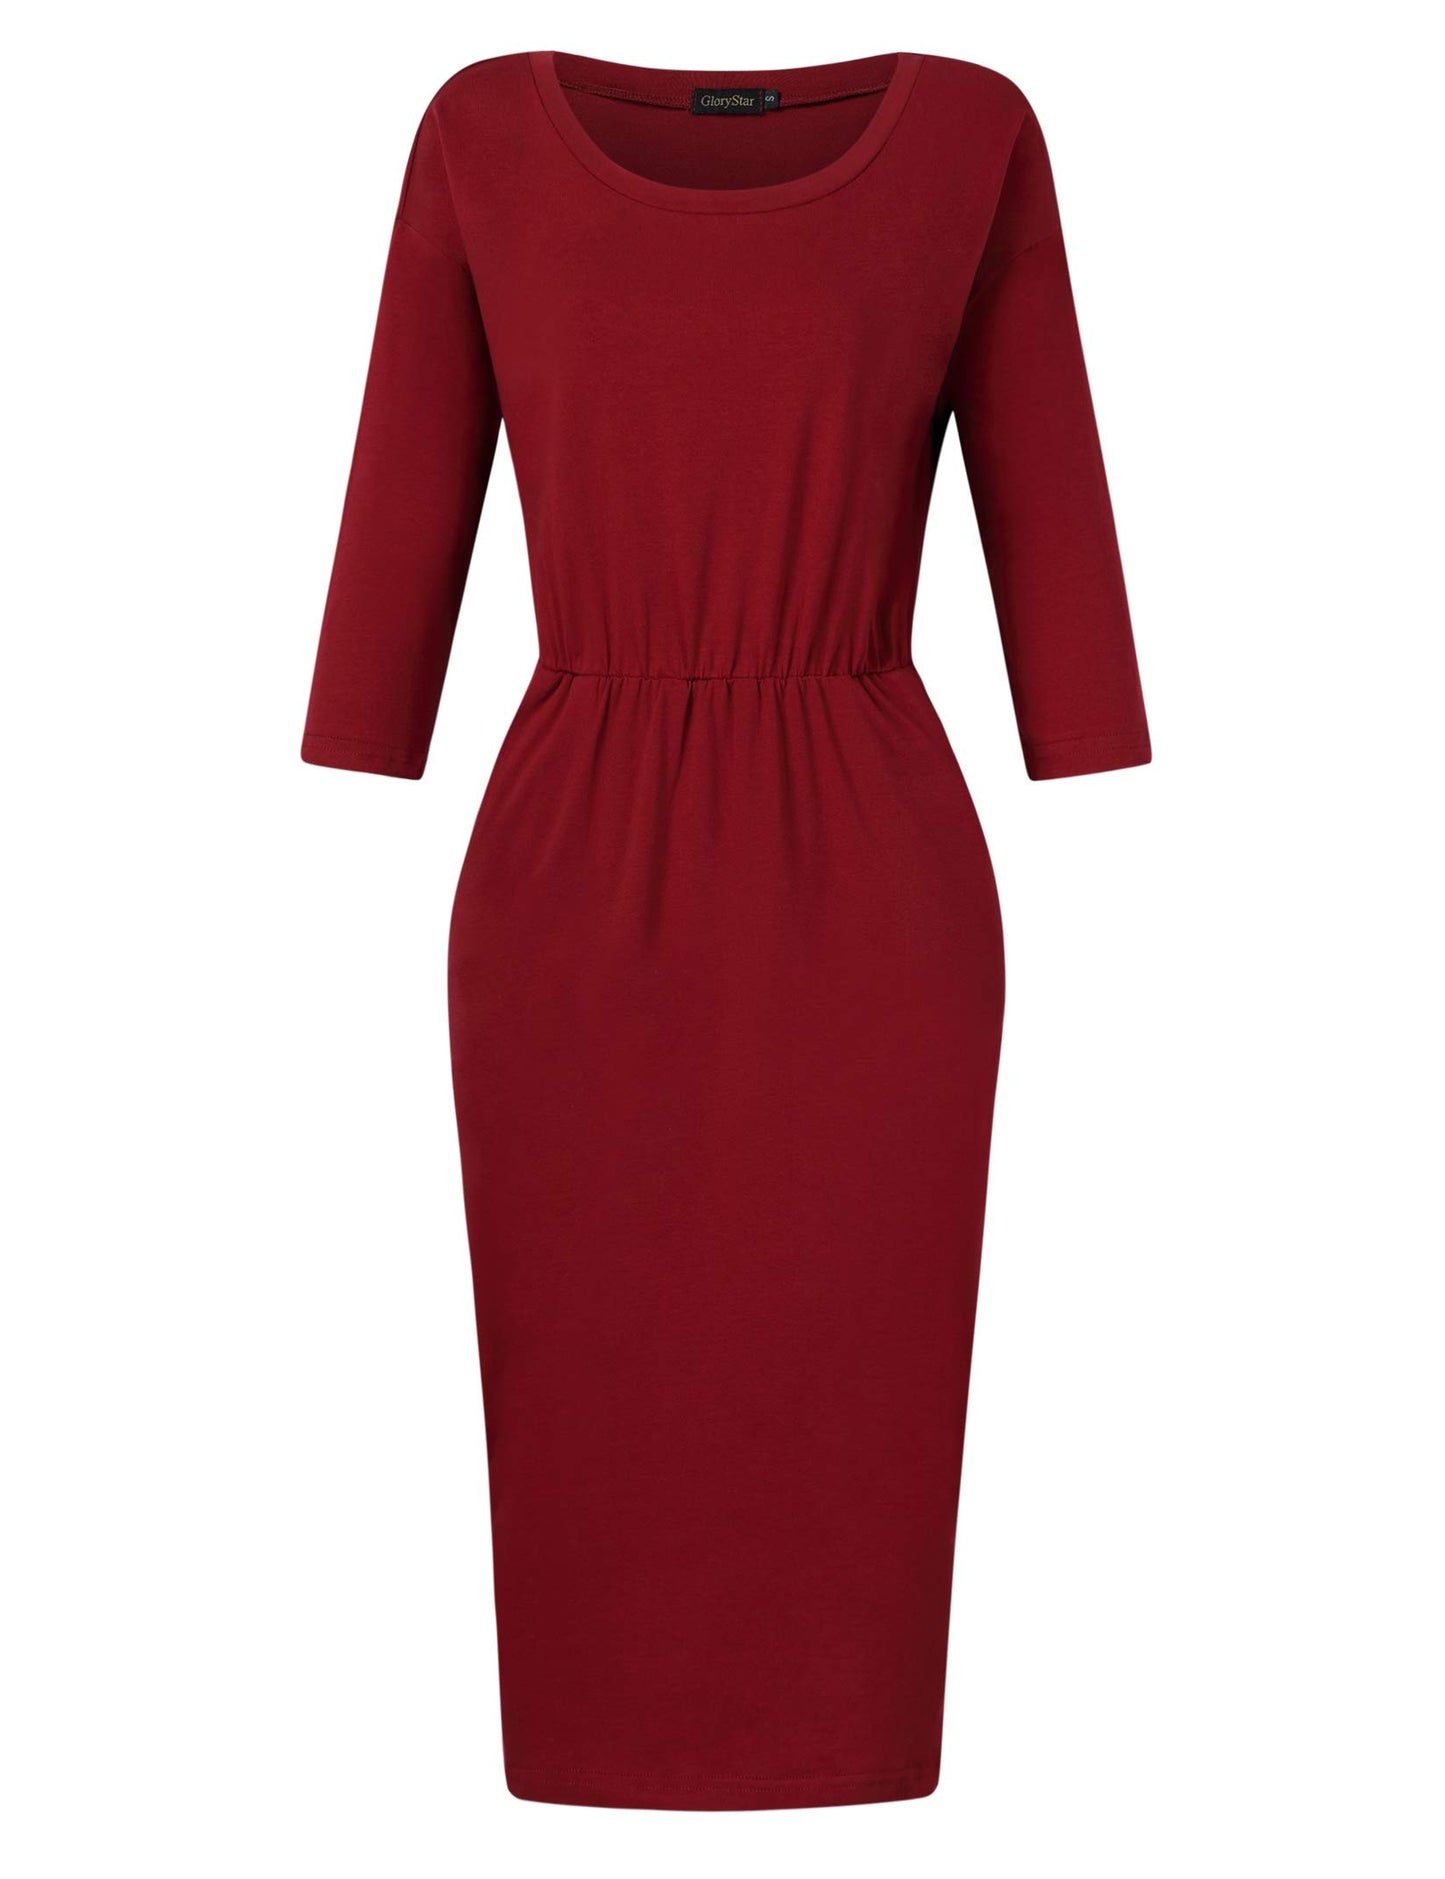 Women's 3/4 Sleeve Round Neck Hips-Wrapped Casual Office Pencil Dress